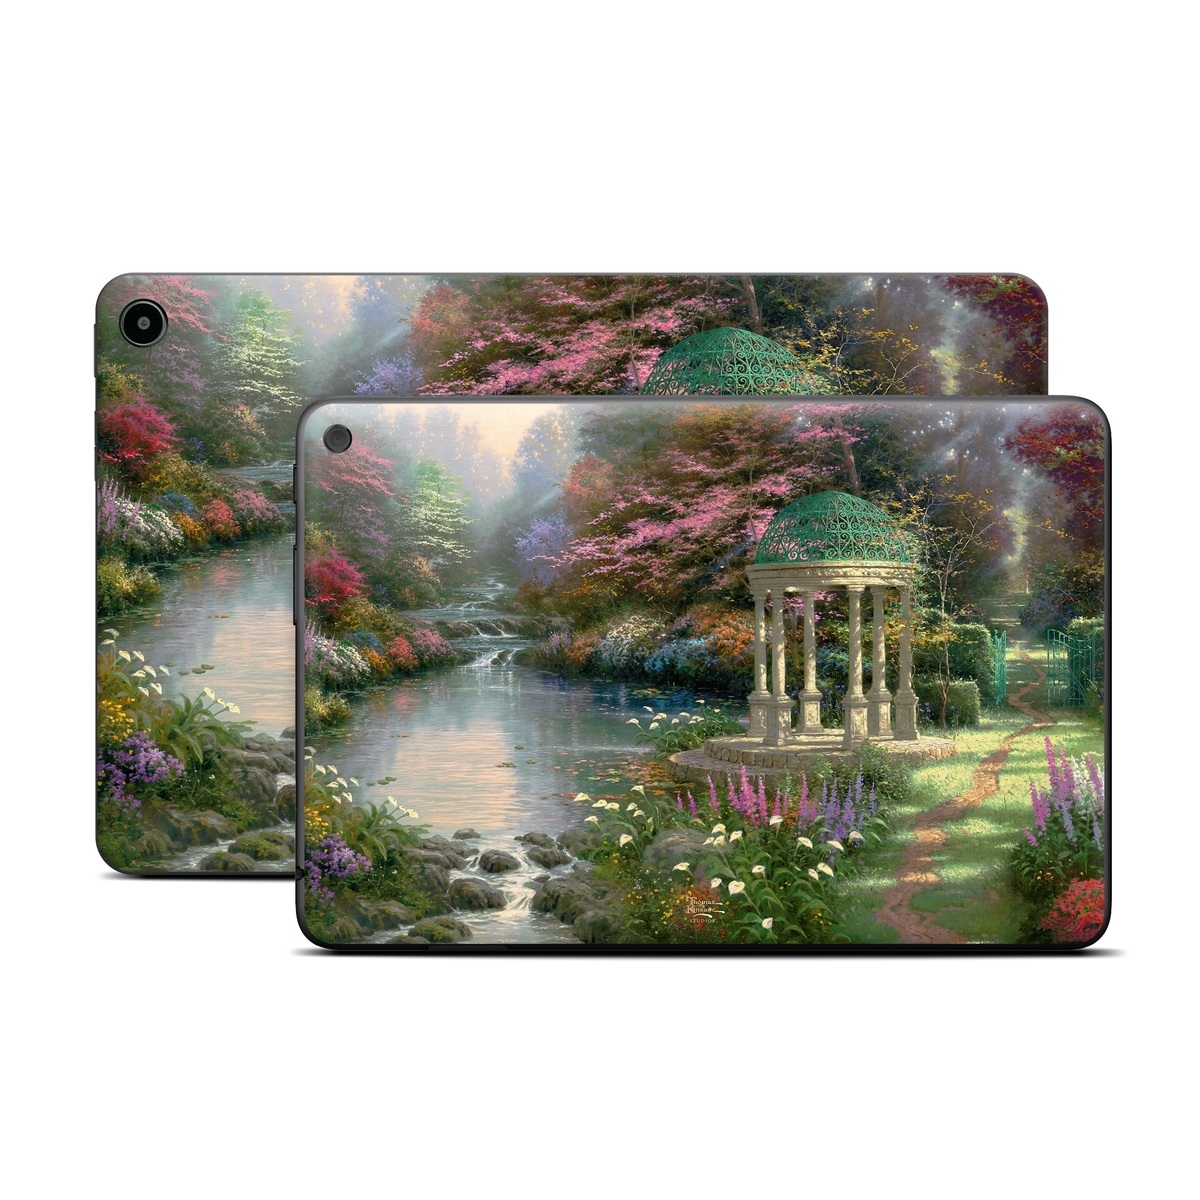 Amazon Fire Tablet Series Skin Skin design of Nature, Natural landscape, Tree, Botany, Water, Garden, Gazebo, Spring, Plant, Reflection, with black, gray, green, red, purple colors